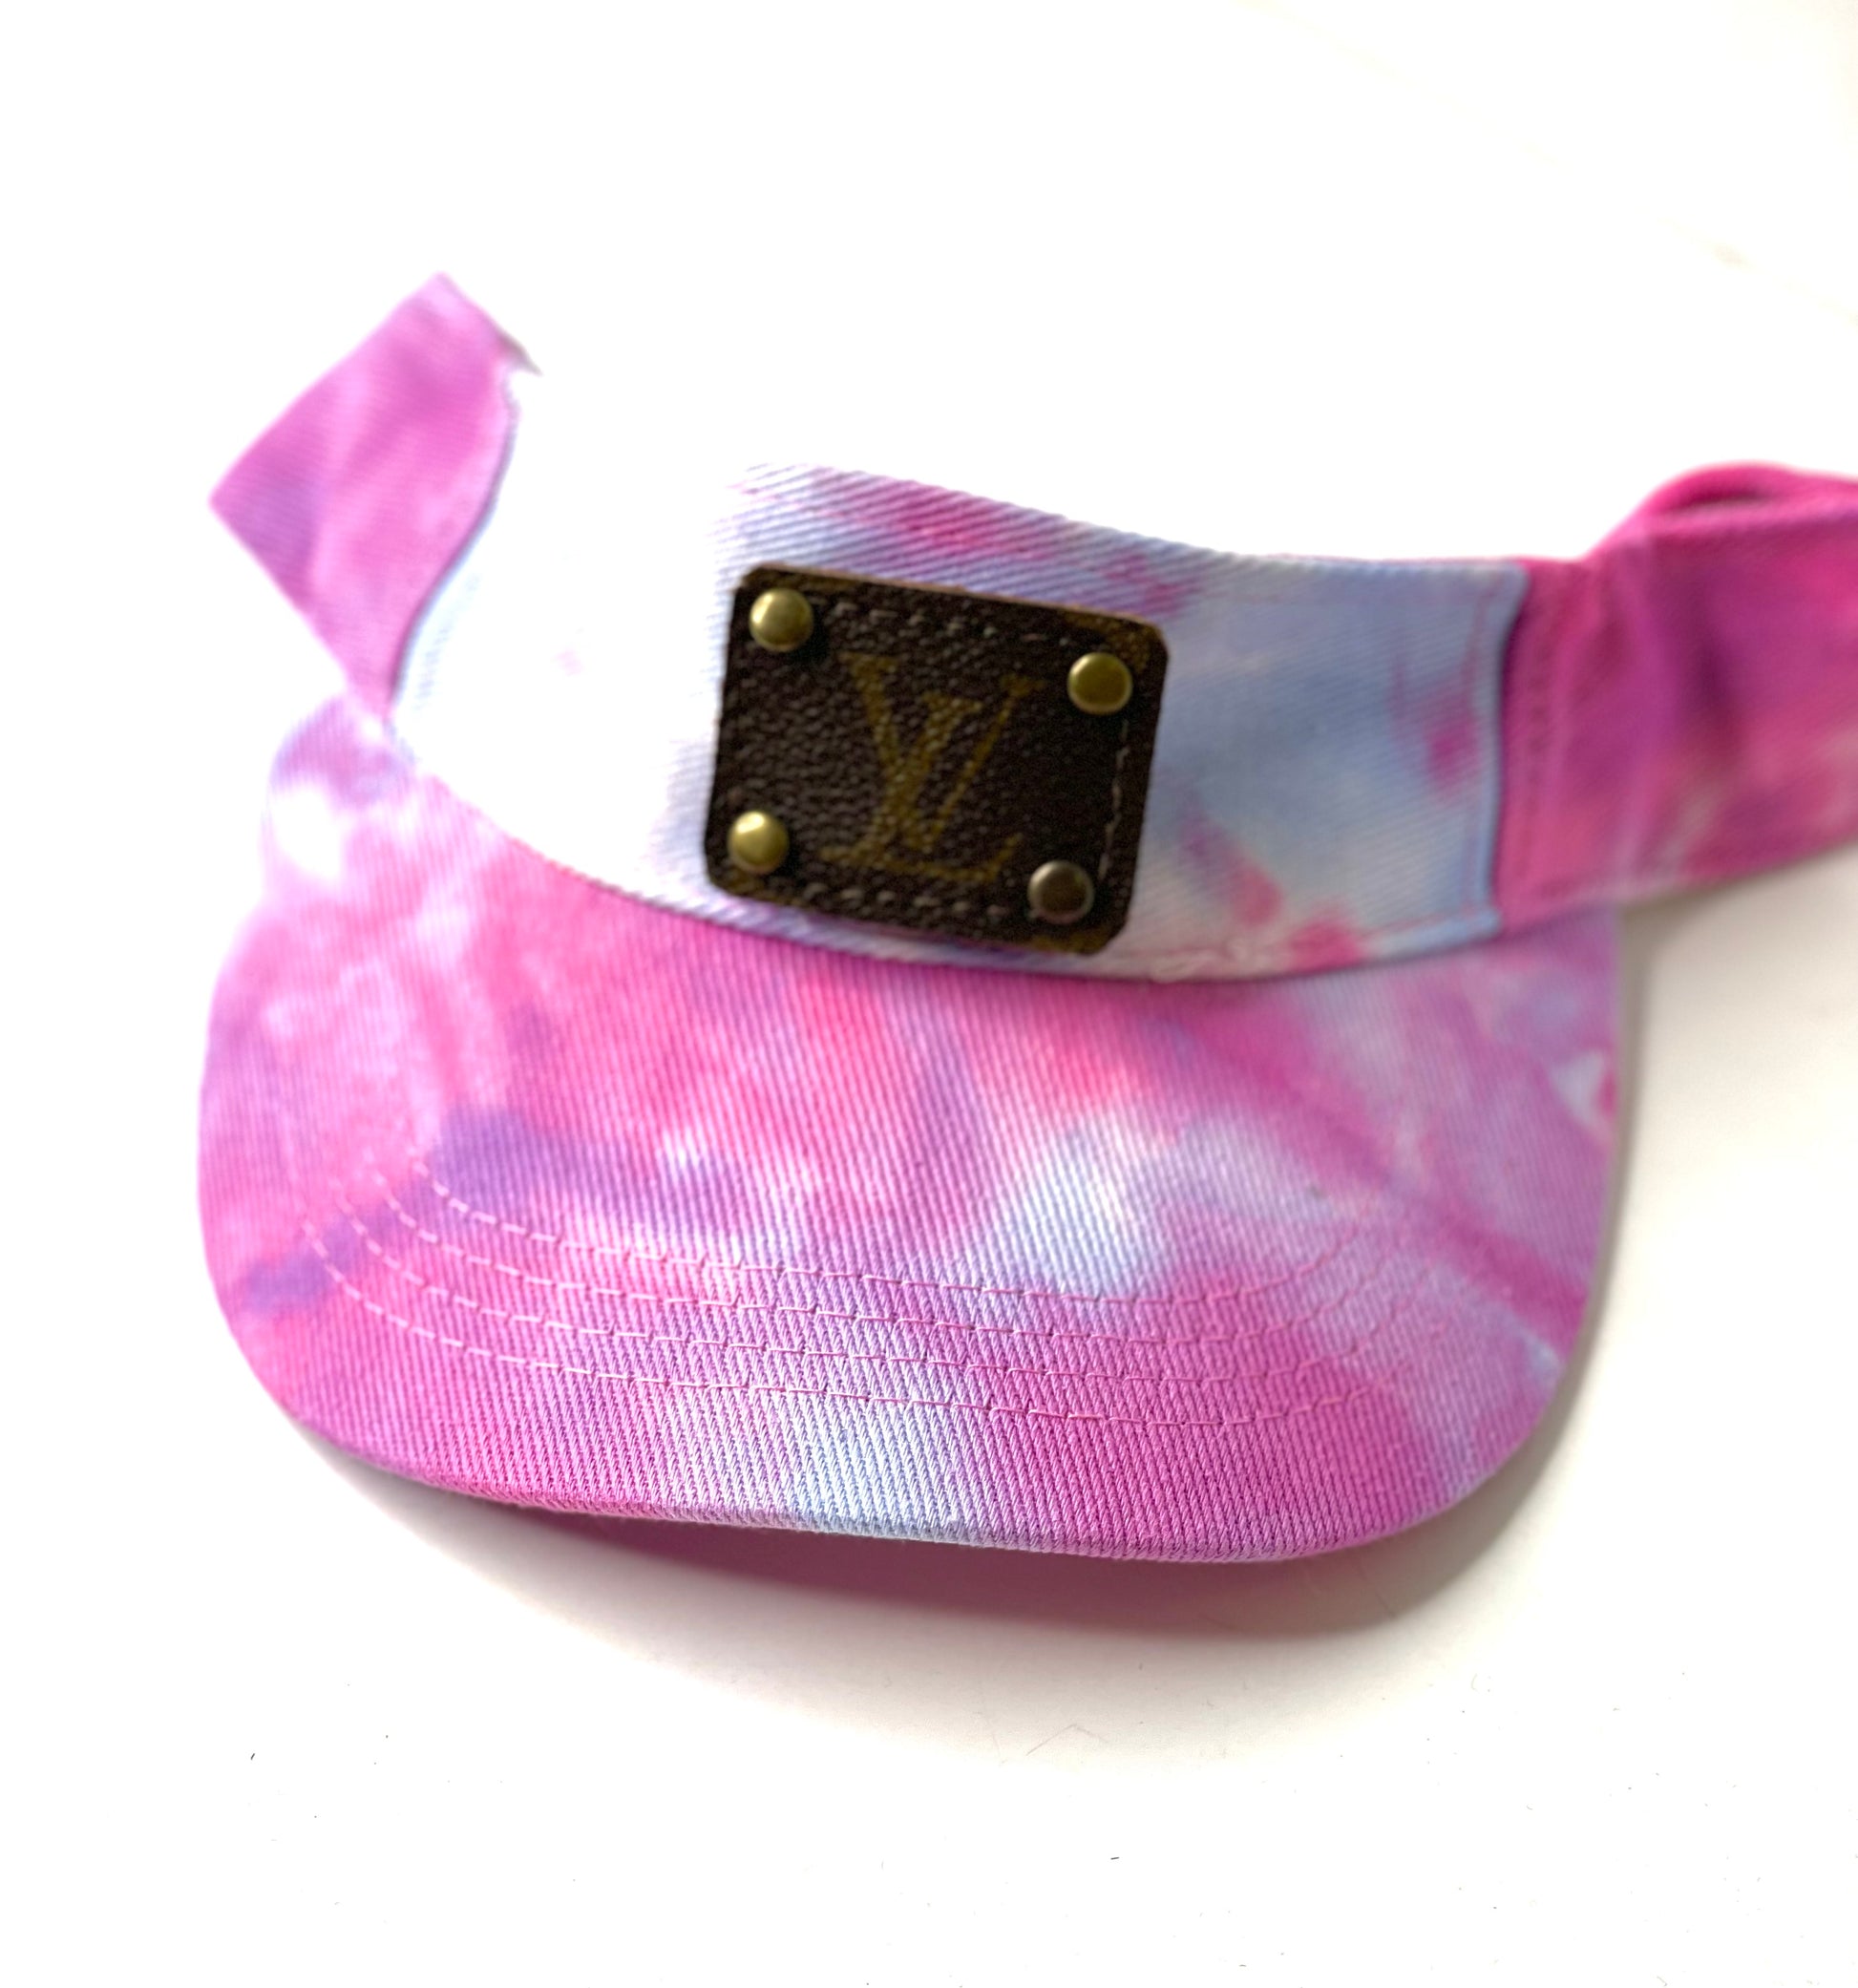 ZZ16 - Tye Dye Pink Visor Antique Hardware - Patches Of Upcycling